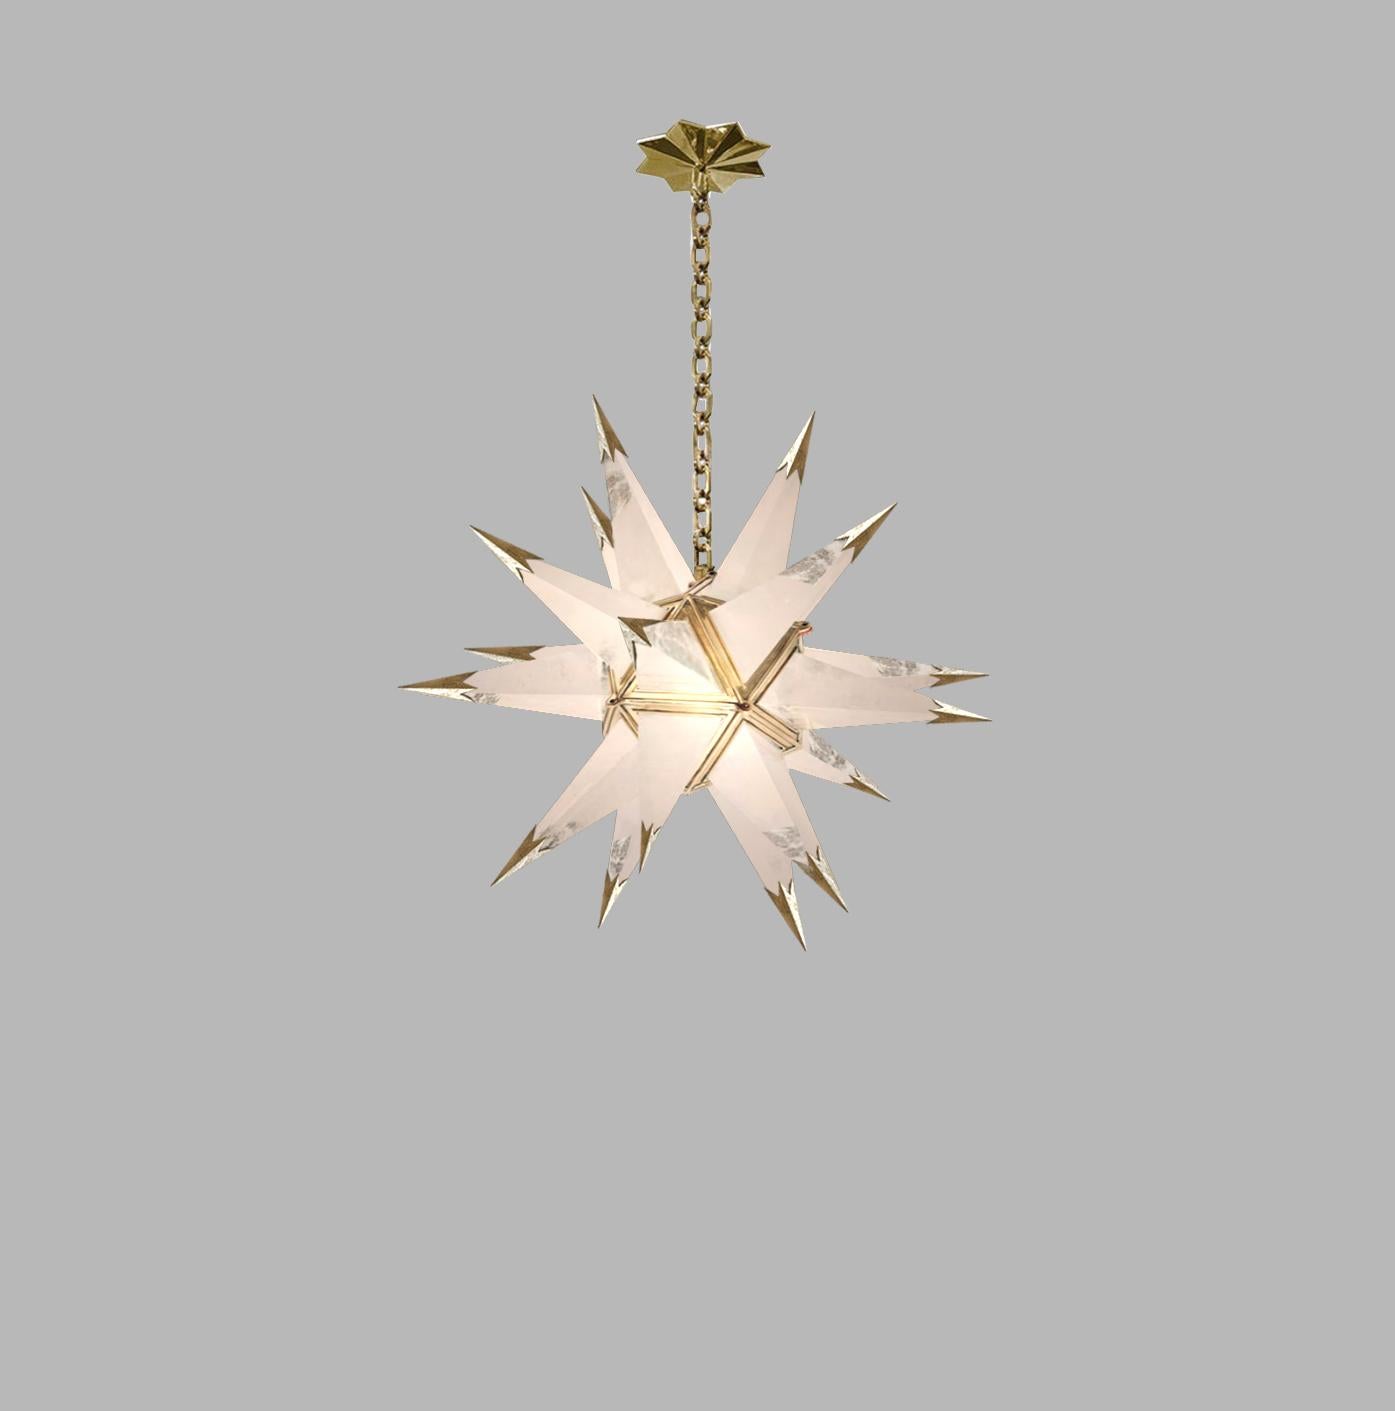 Finely carved star form rock crystal chandelier with polished brass finish frame. Created by Phoenix Gallery, NYC.
The chandelier is 21.5